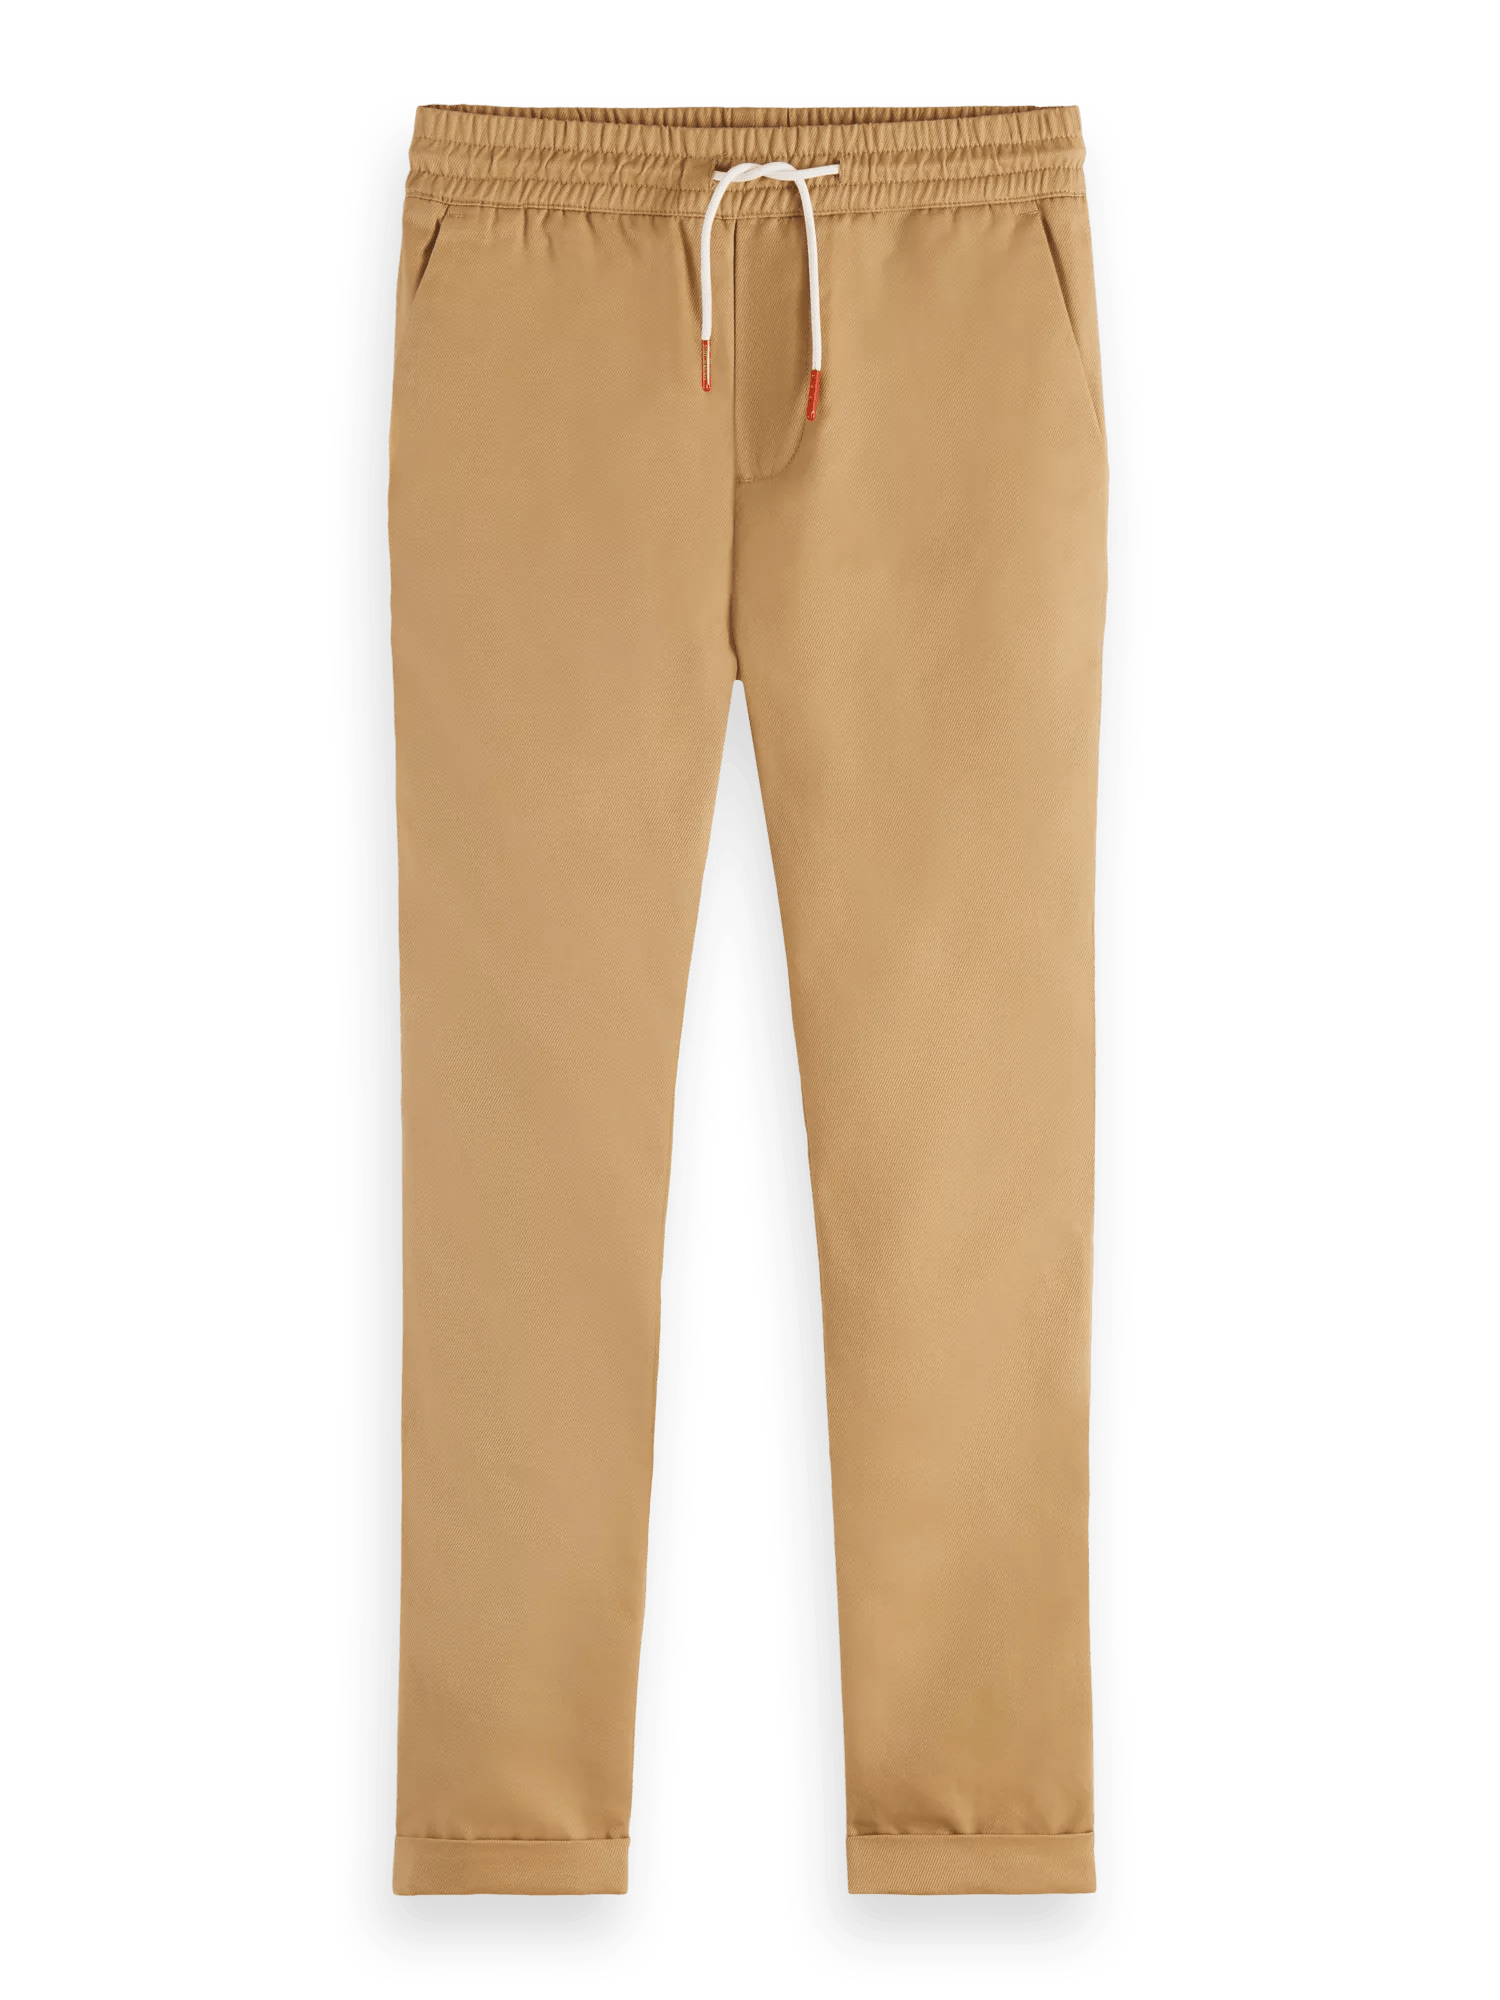 Scotch & Soda Relaxed slim fit organic cotton twill trousers FNT